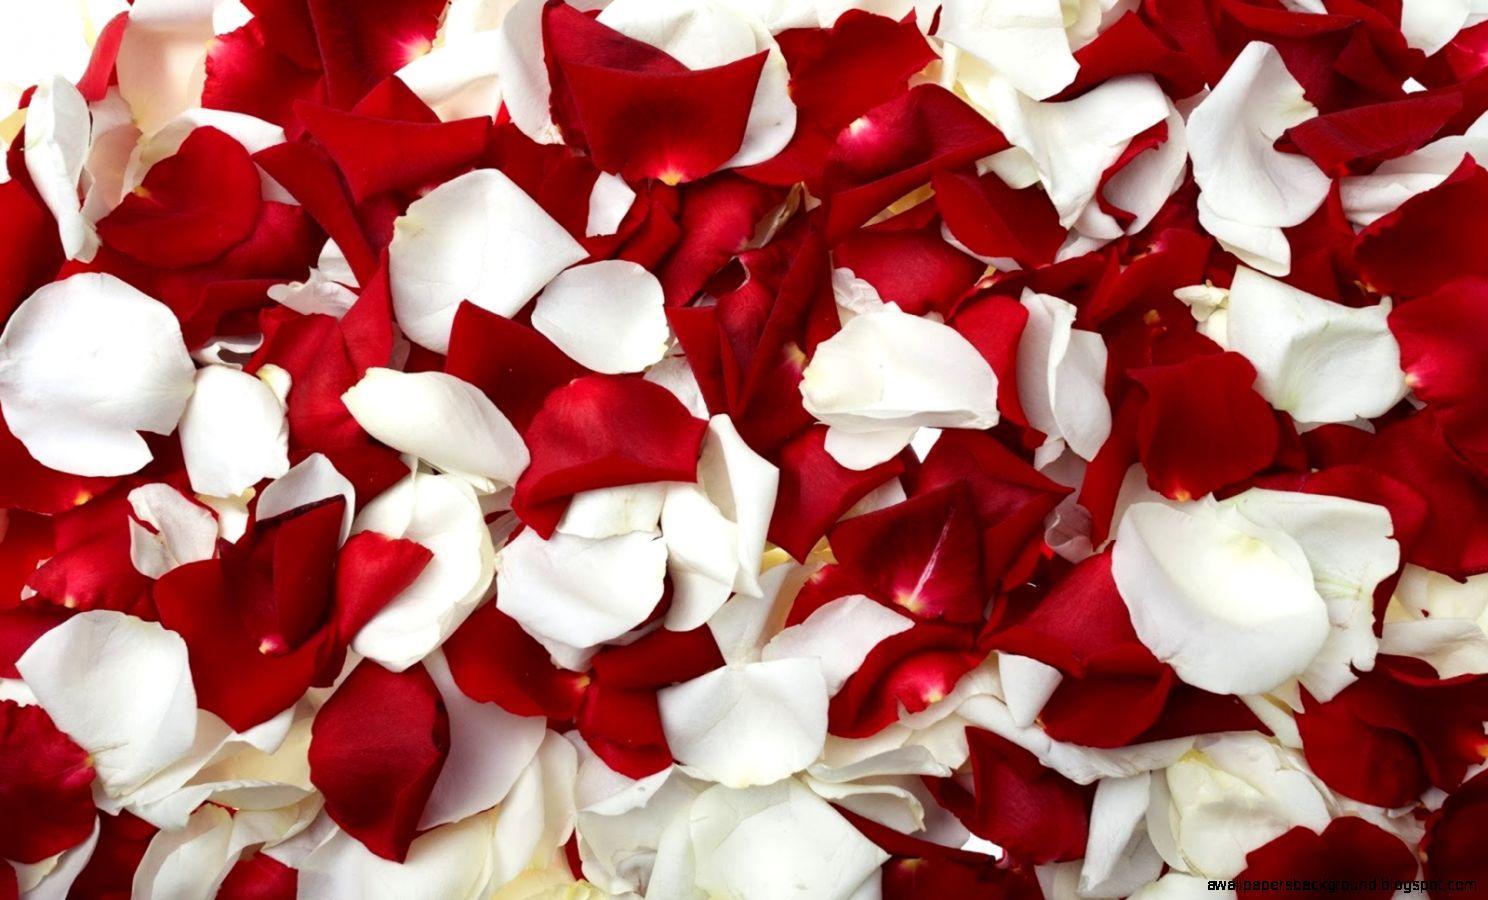 Red And White Roses Wallpaper